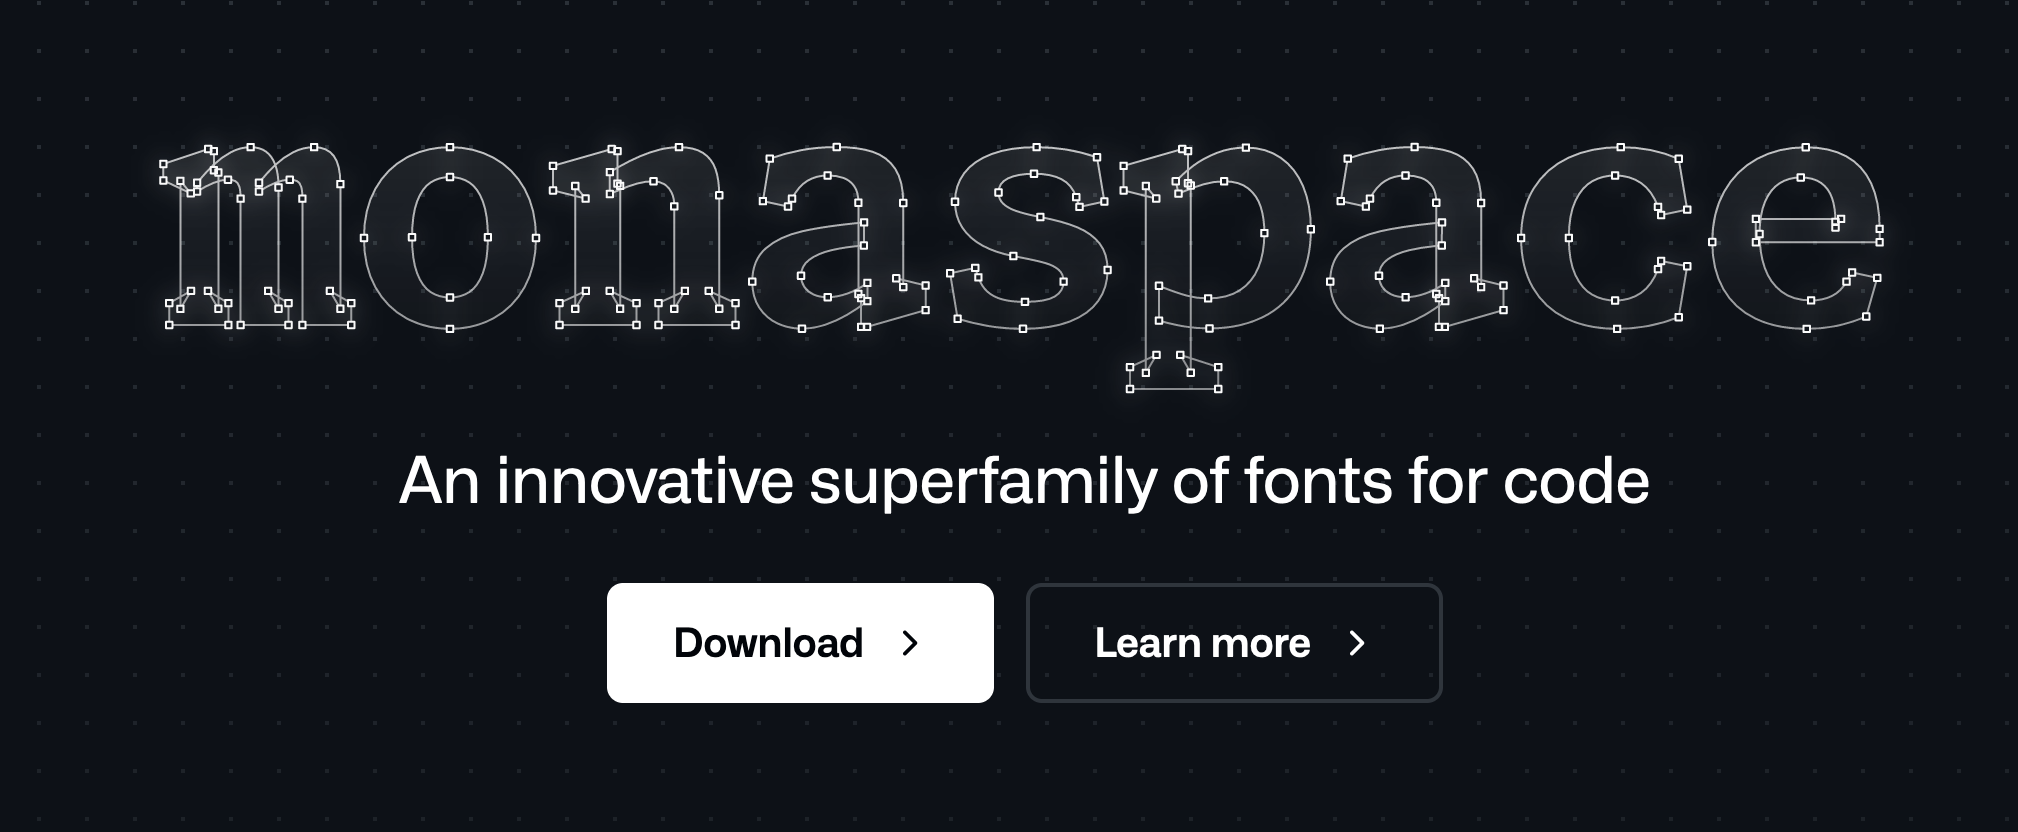 monaspace — An innovative superfamily of fonts for code.